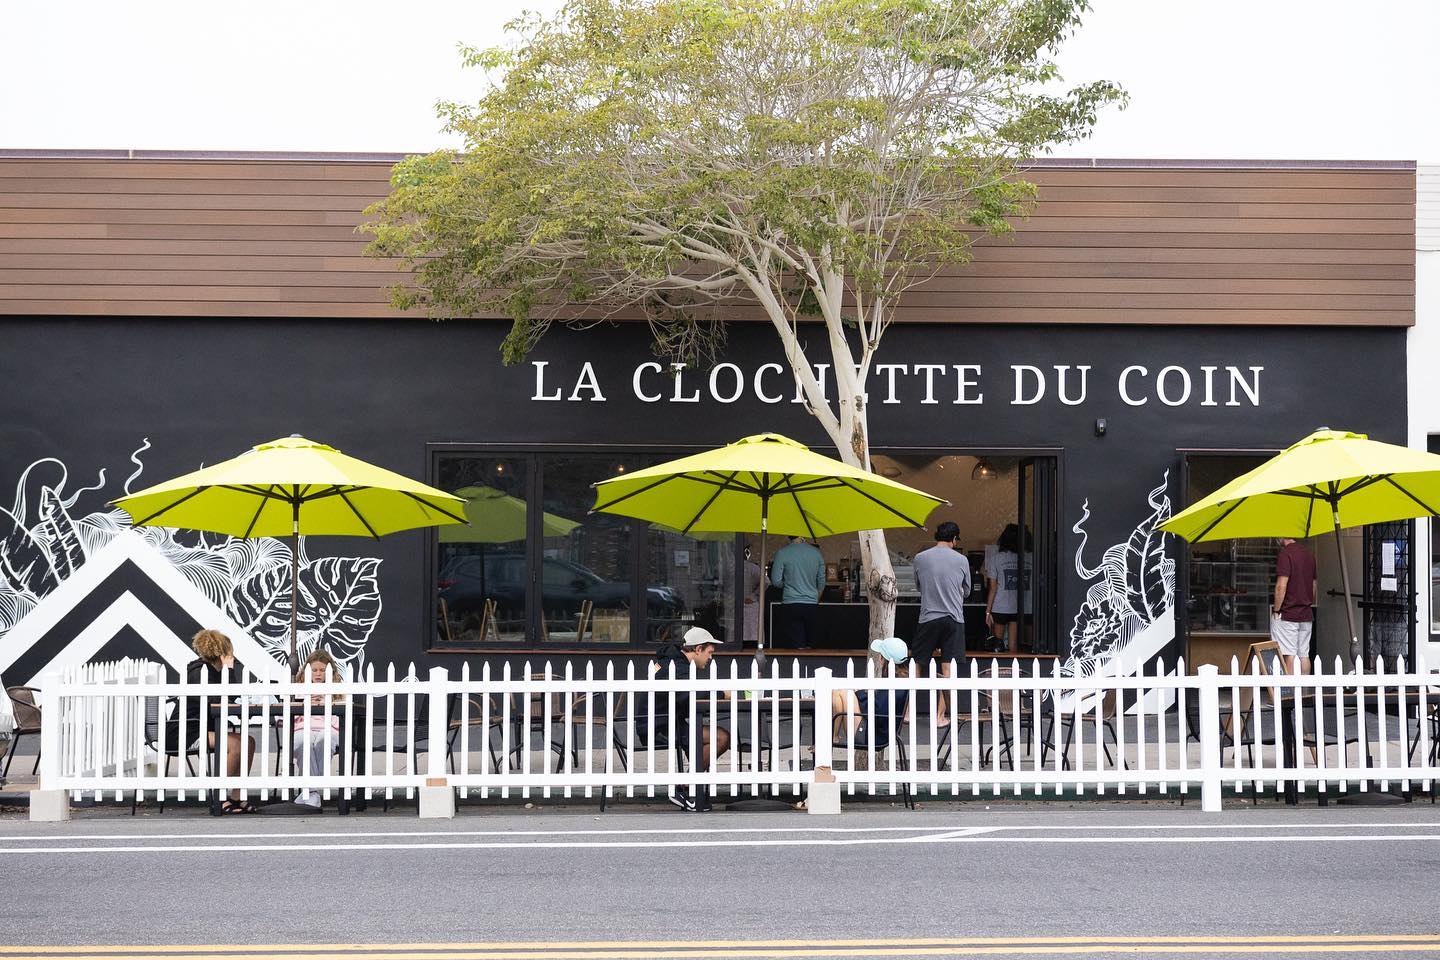 La Clochette French restaurant opening a new location in Mission Valley, San Diego